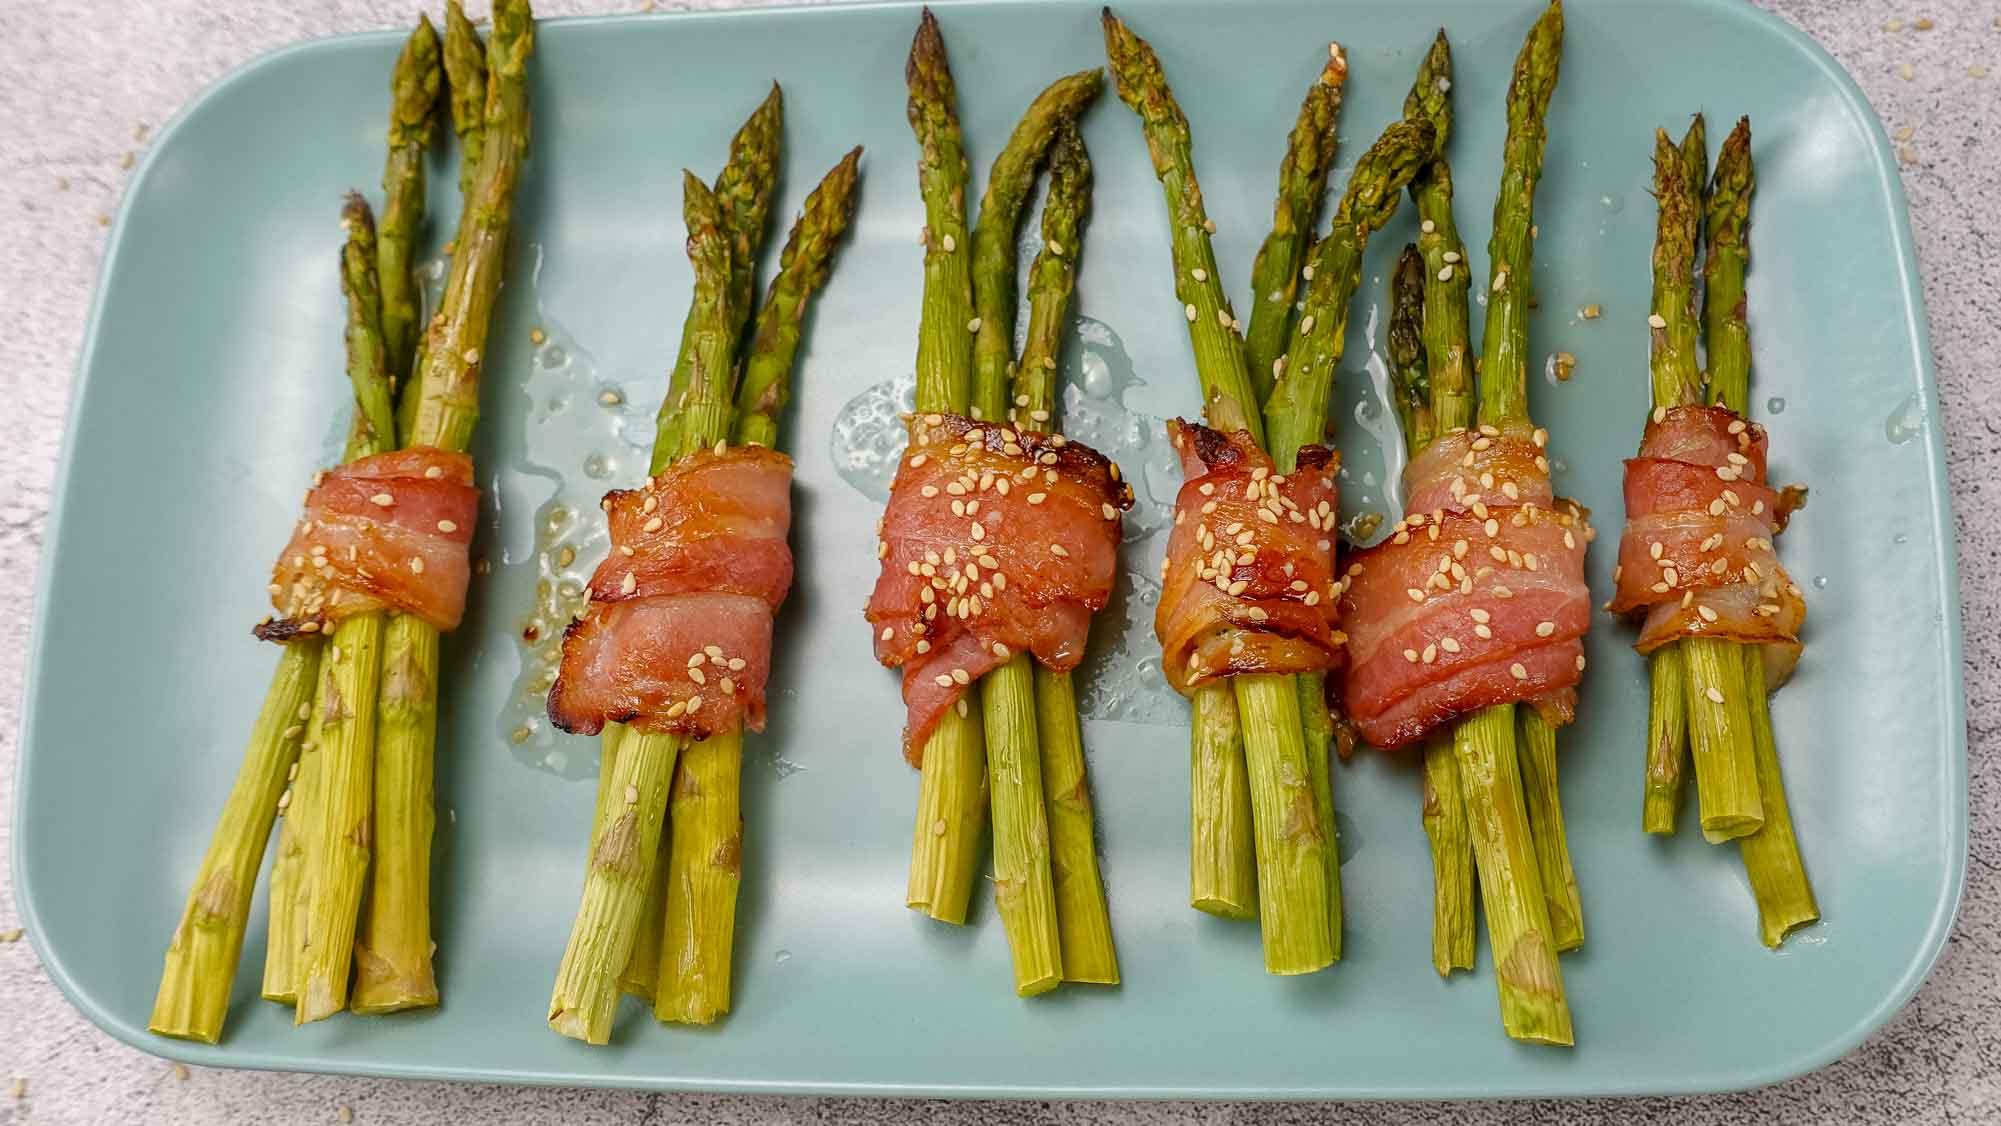 Bacon Wrapped Asparagus Recipe on a blue plate.